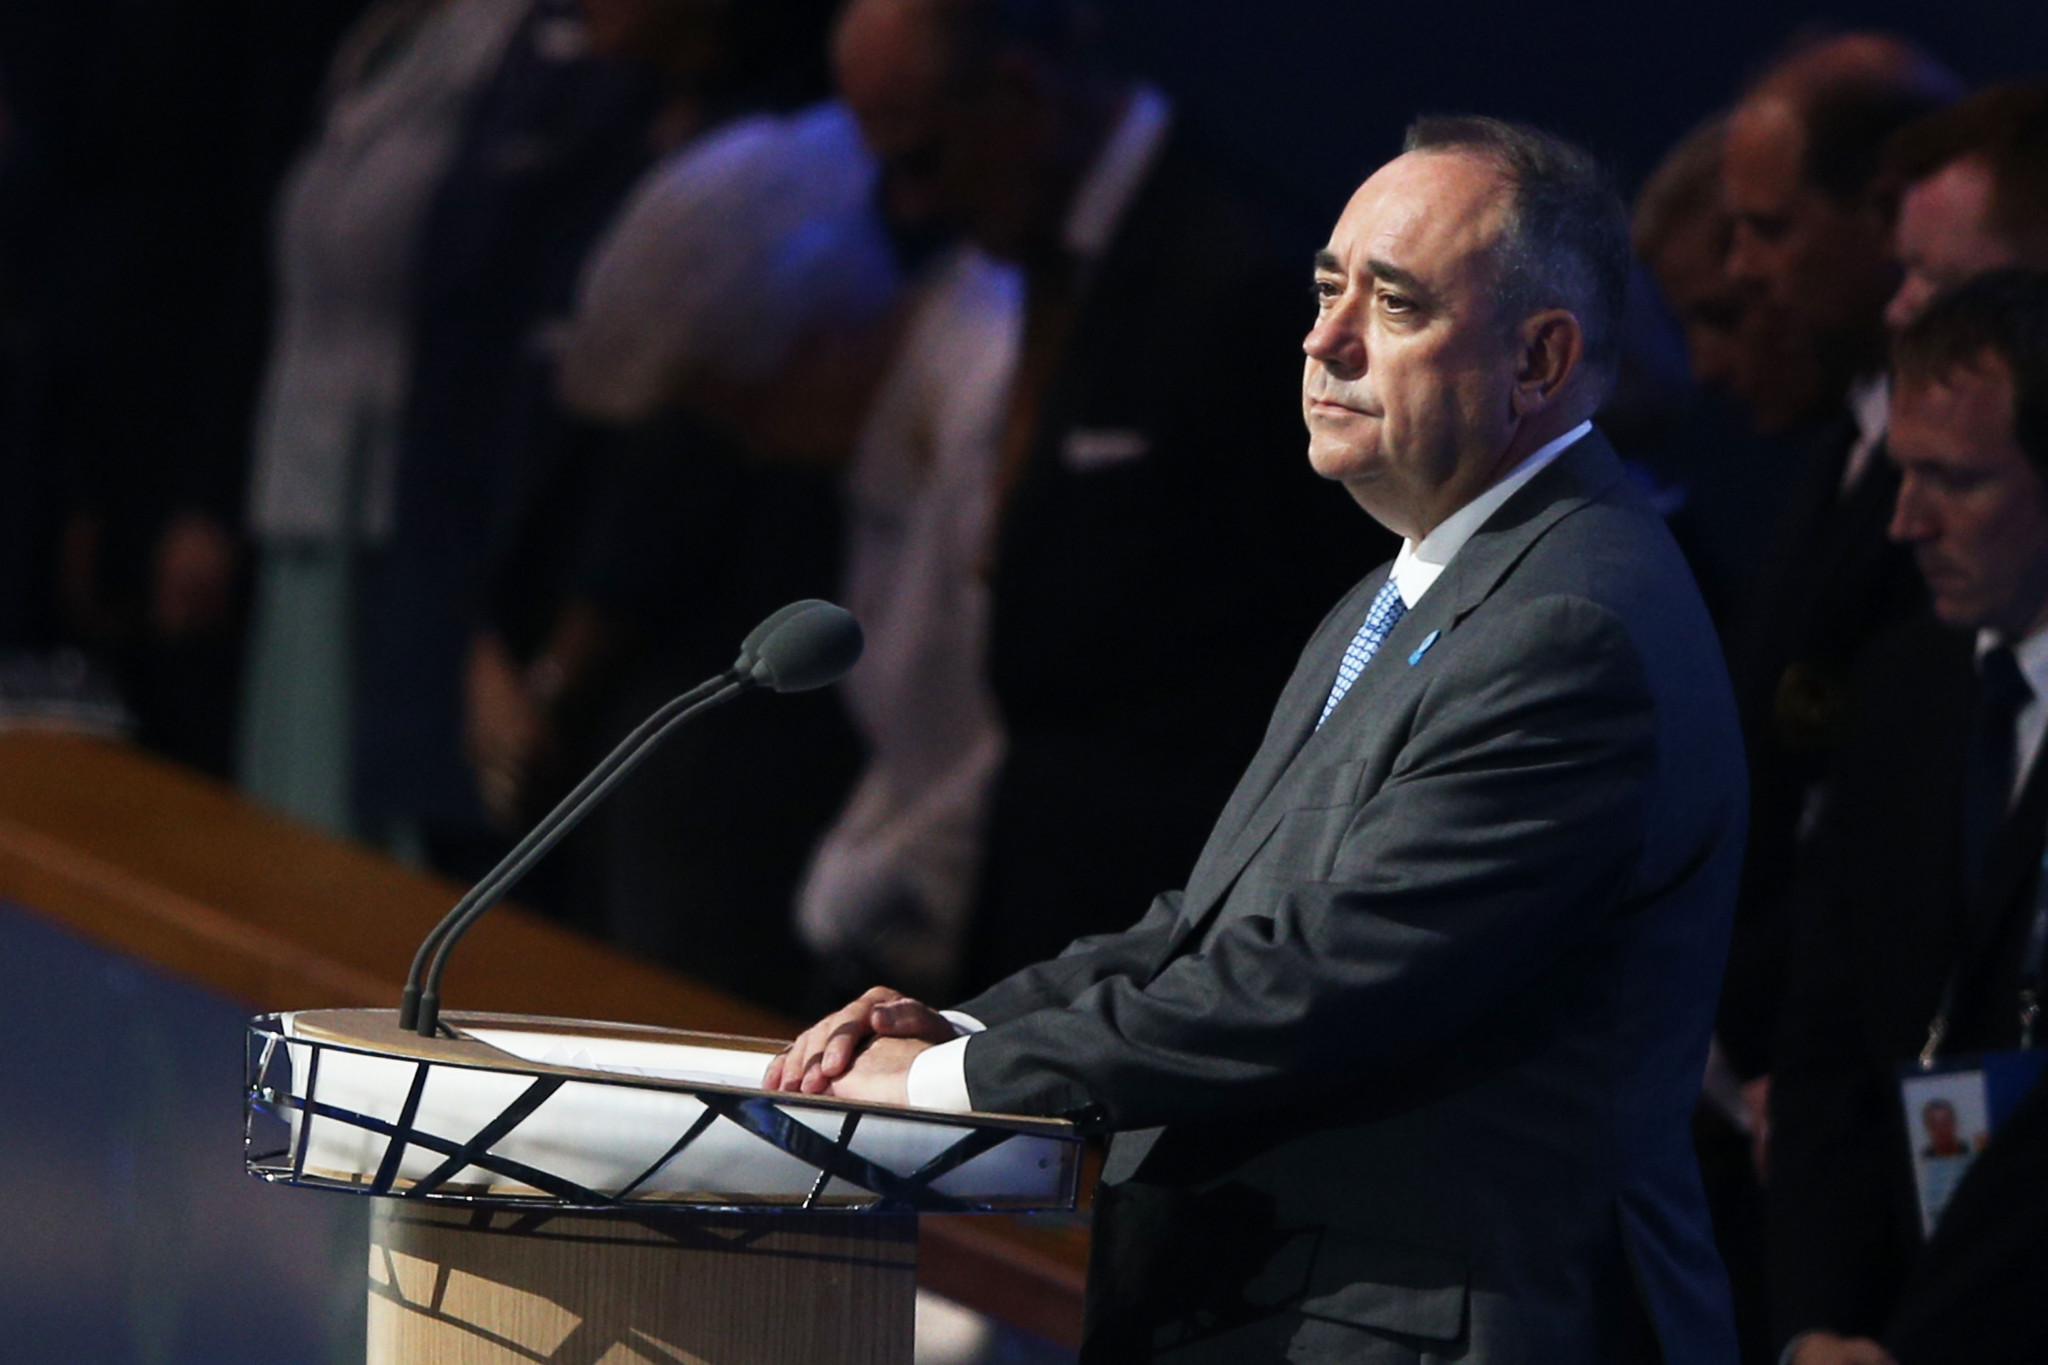 Alex Salmond First Minister of Scotland speaks during the Opening Ceremony for the Glasgow 2014 Commonwealth Games ©Getty Images